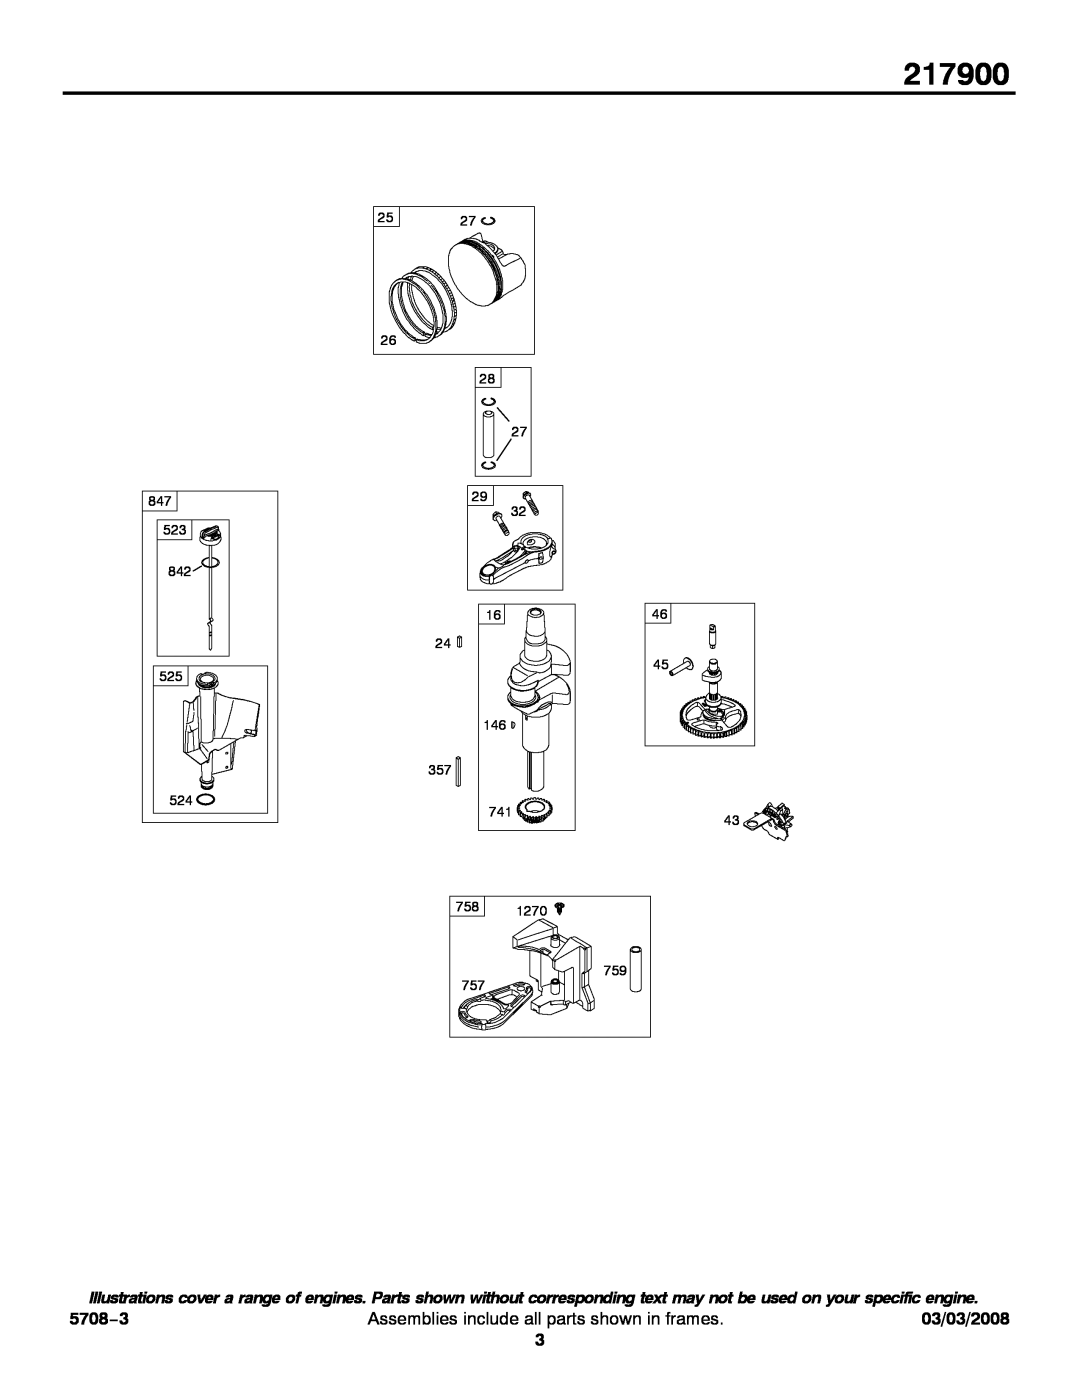 Briggs & Stratton 217900 service manual 5708−3, Assemblies include all parts shown in frames, 03/03/2008 